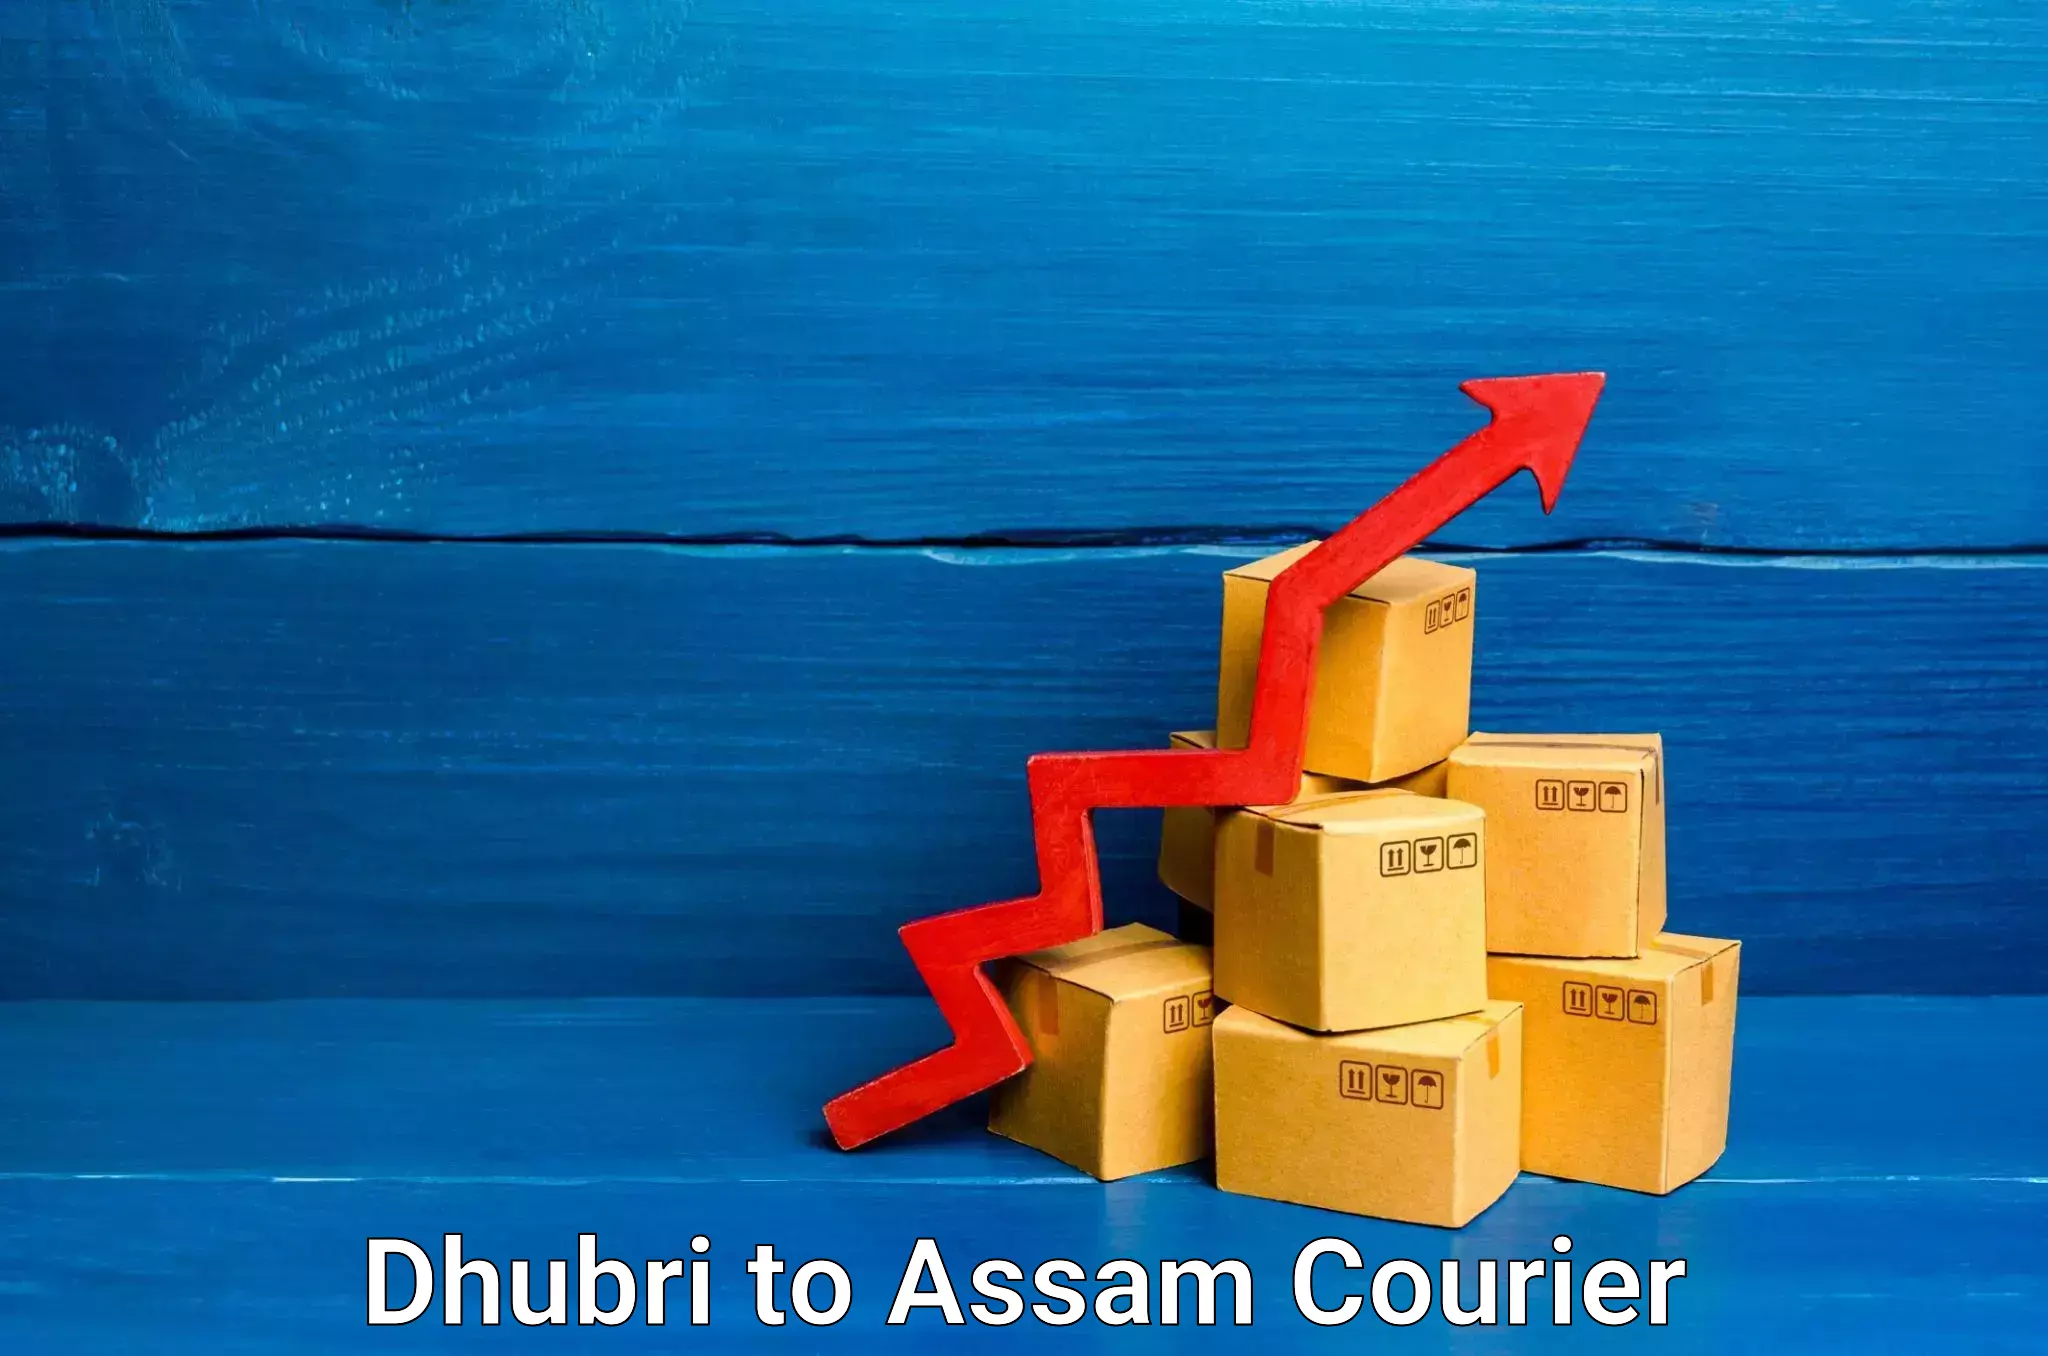 Flexible shipping options Dhubri to Silchar